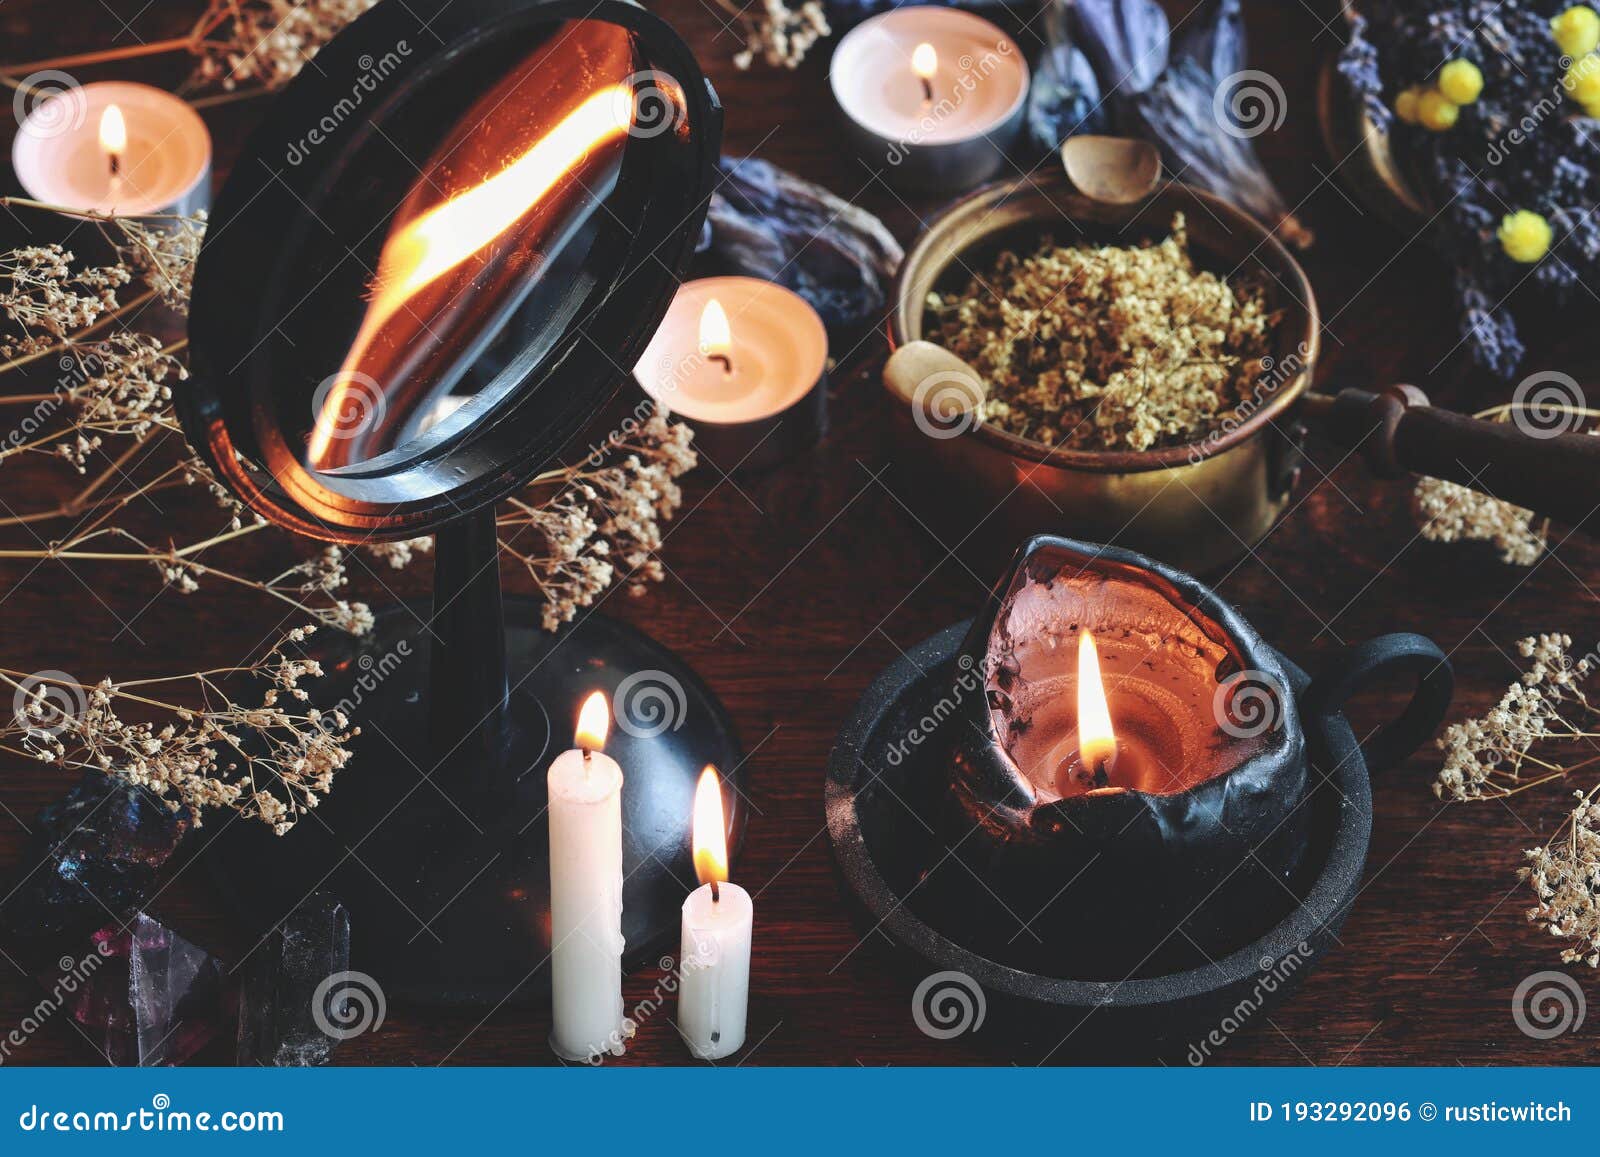 candle flame divination in concave mirror on wiccan witch altar